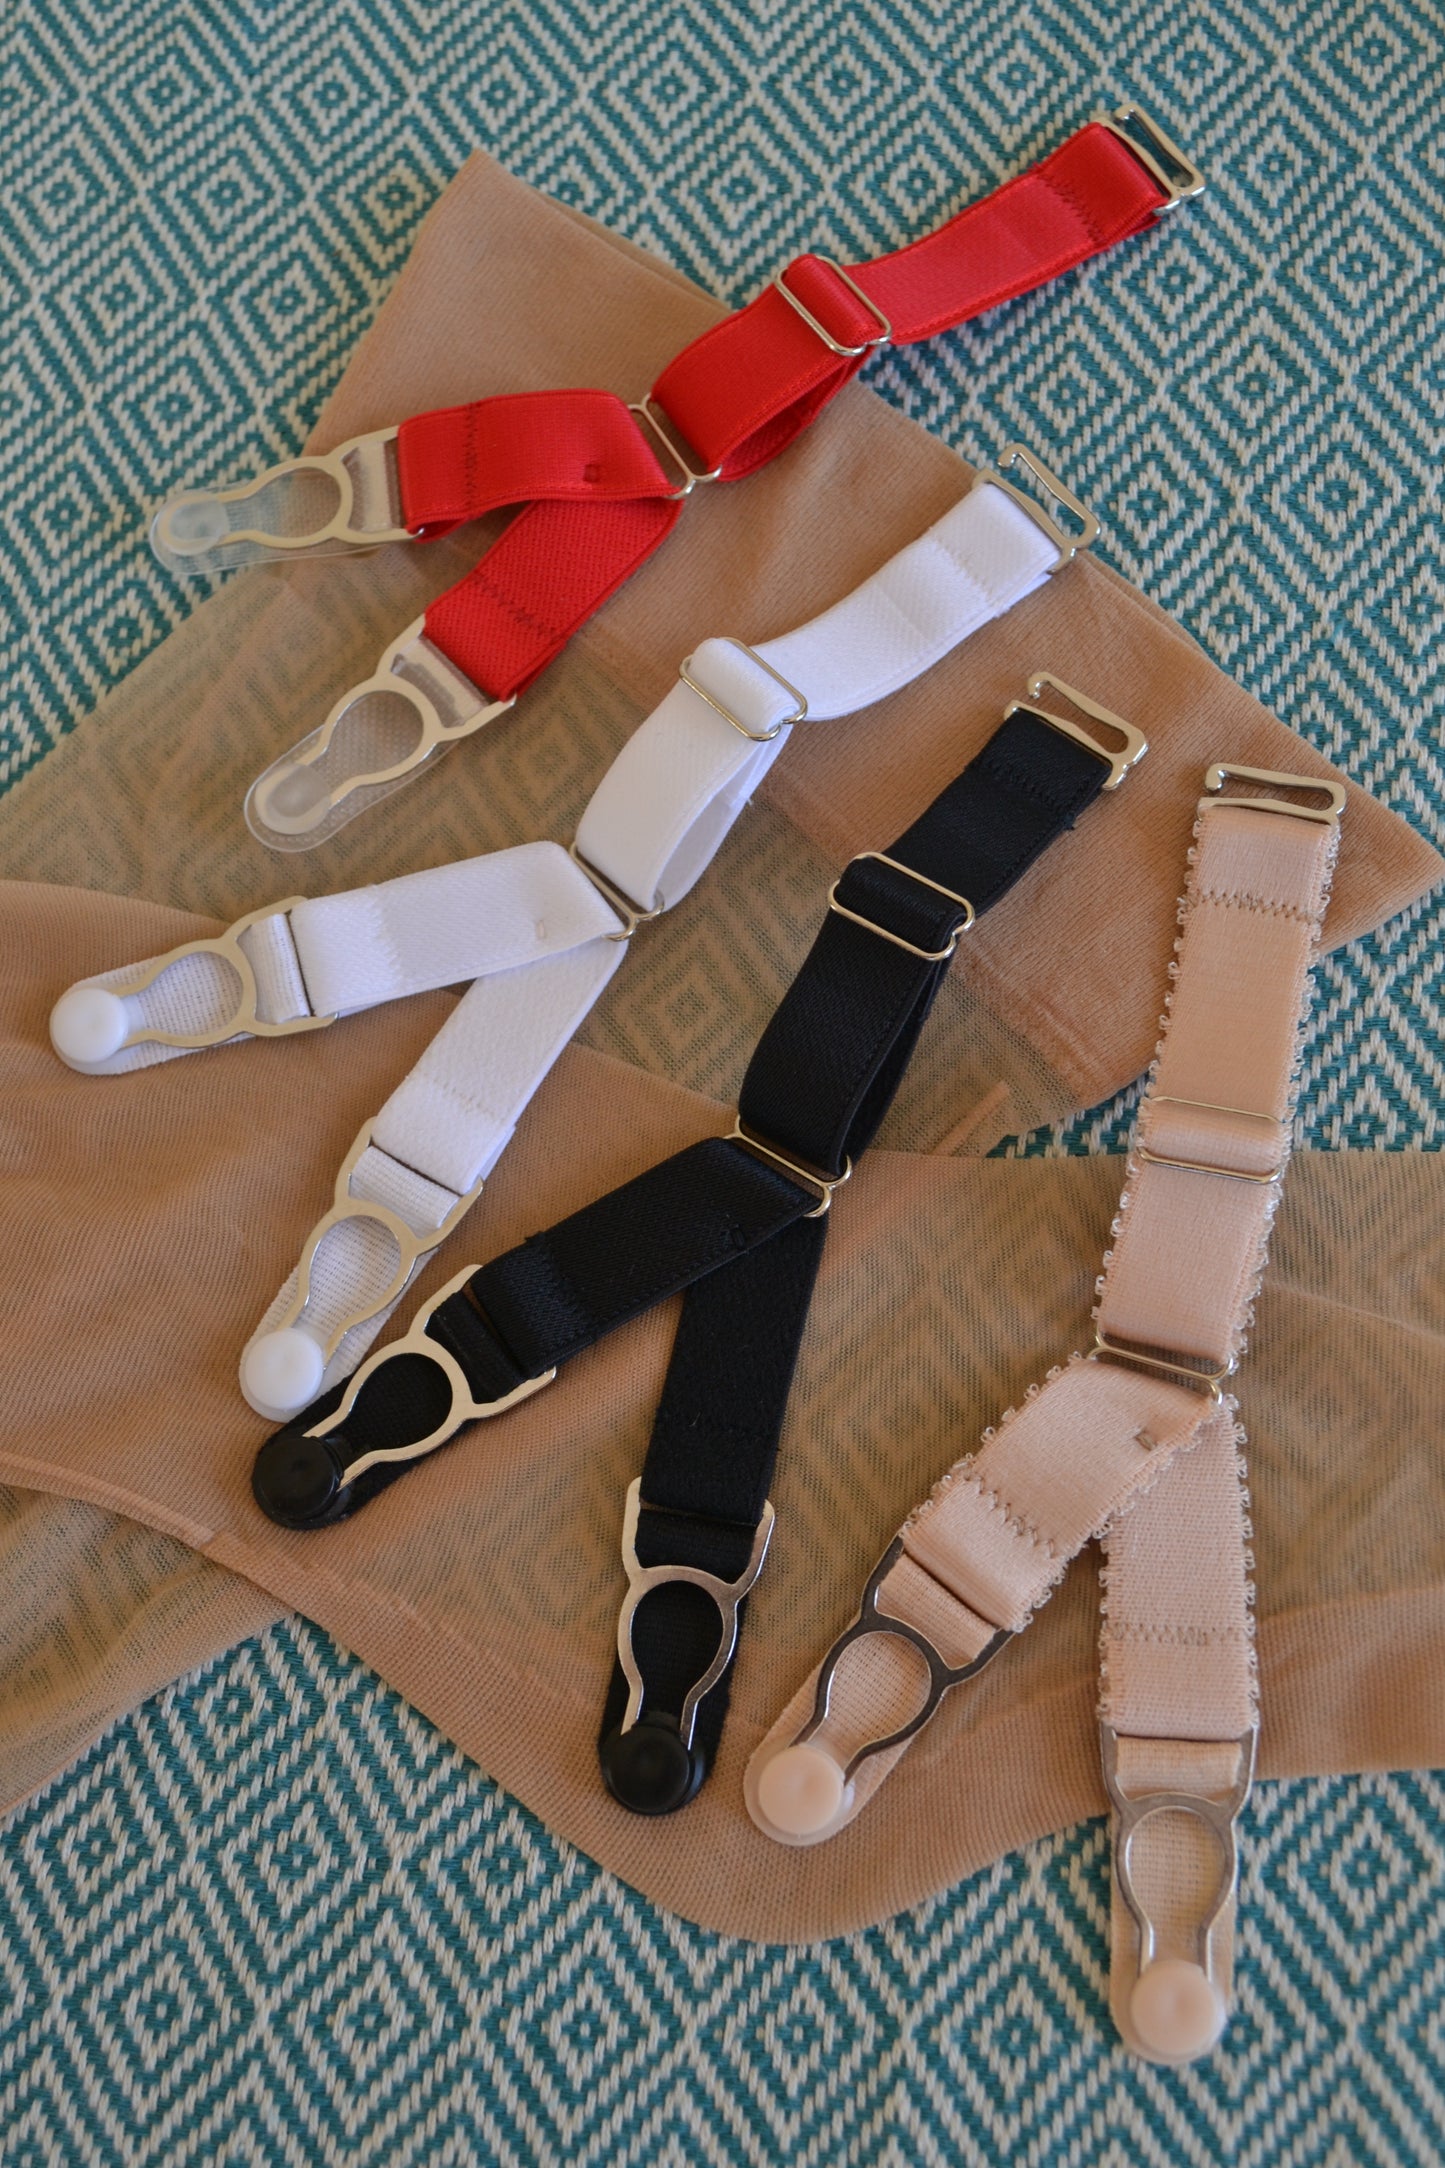   Double suspender straps Y strap garter with a hook on top to attach your corset or masque to seamed nylon stockings. 15mm wide elastic in colour black red white and nude beige biscotti peach. 